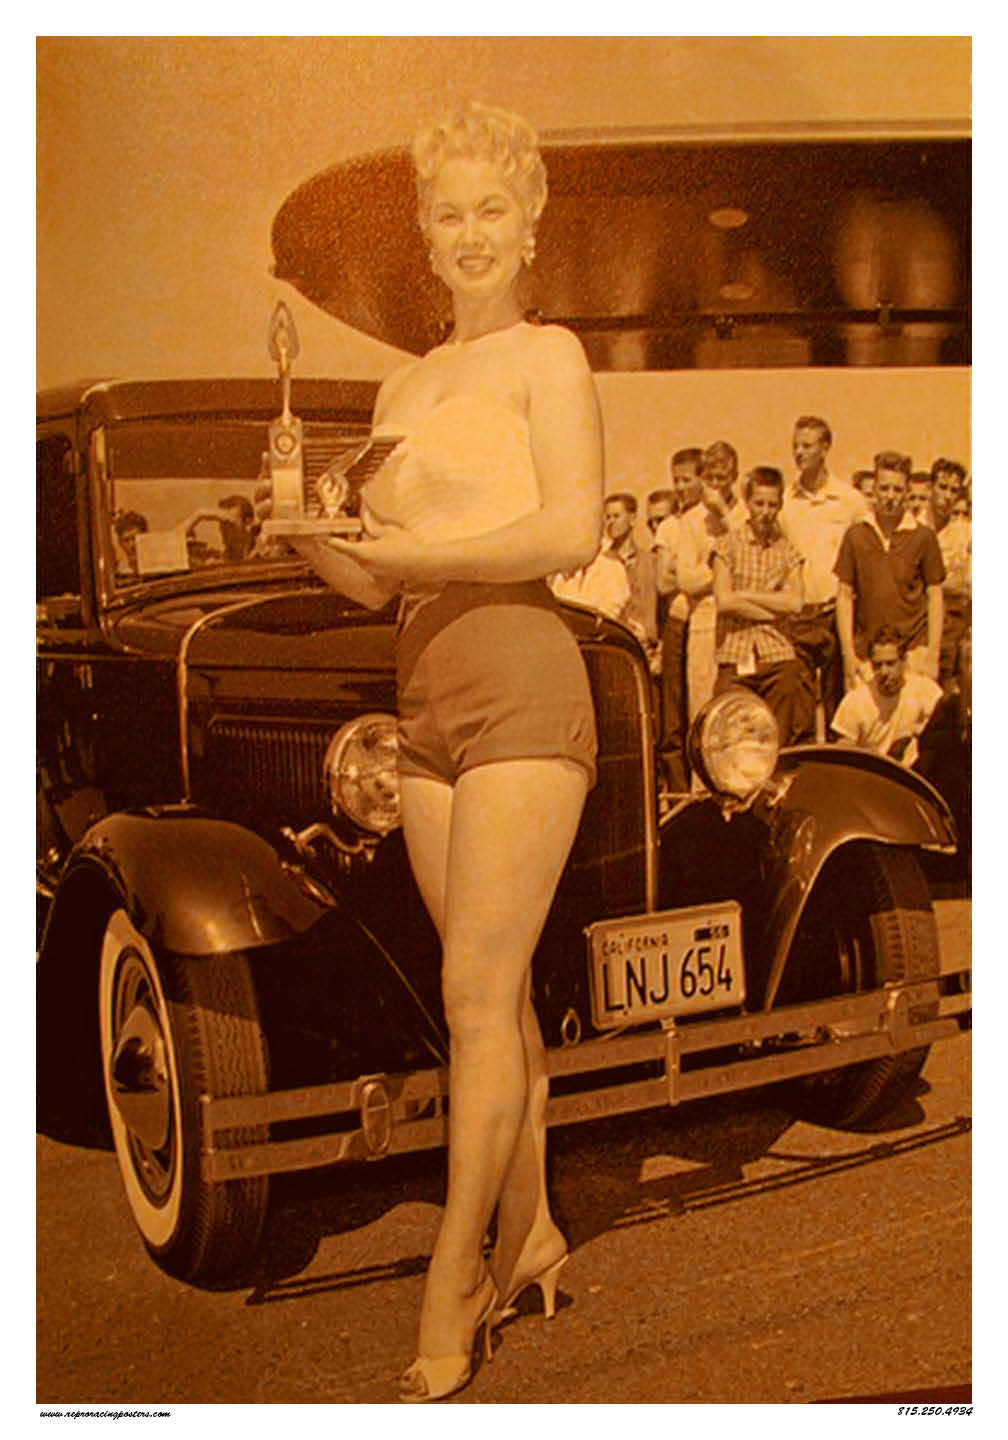 50s Hot Rod Pinup Girl Vintage Reproduction Racing Posters